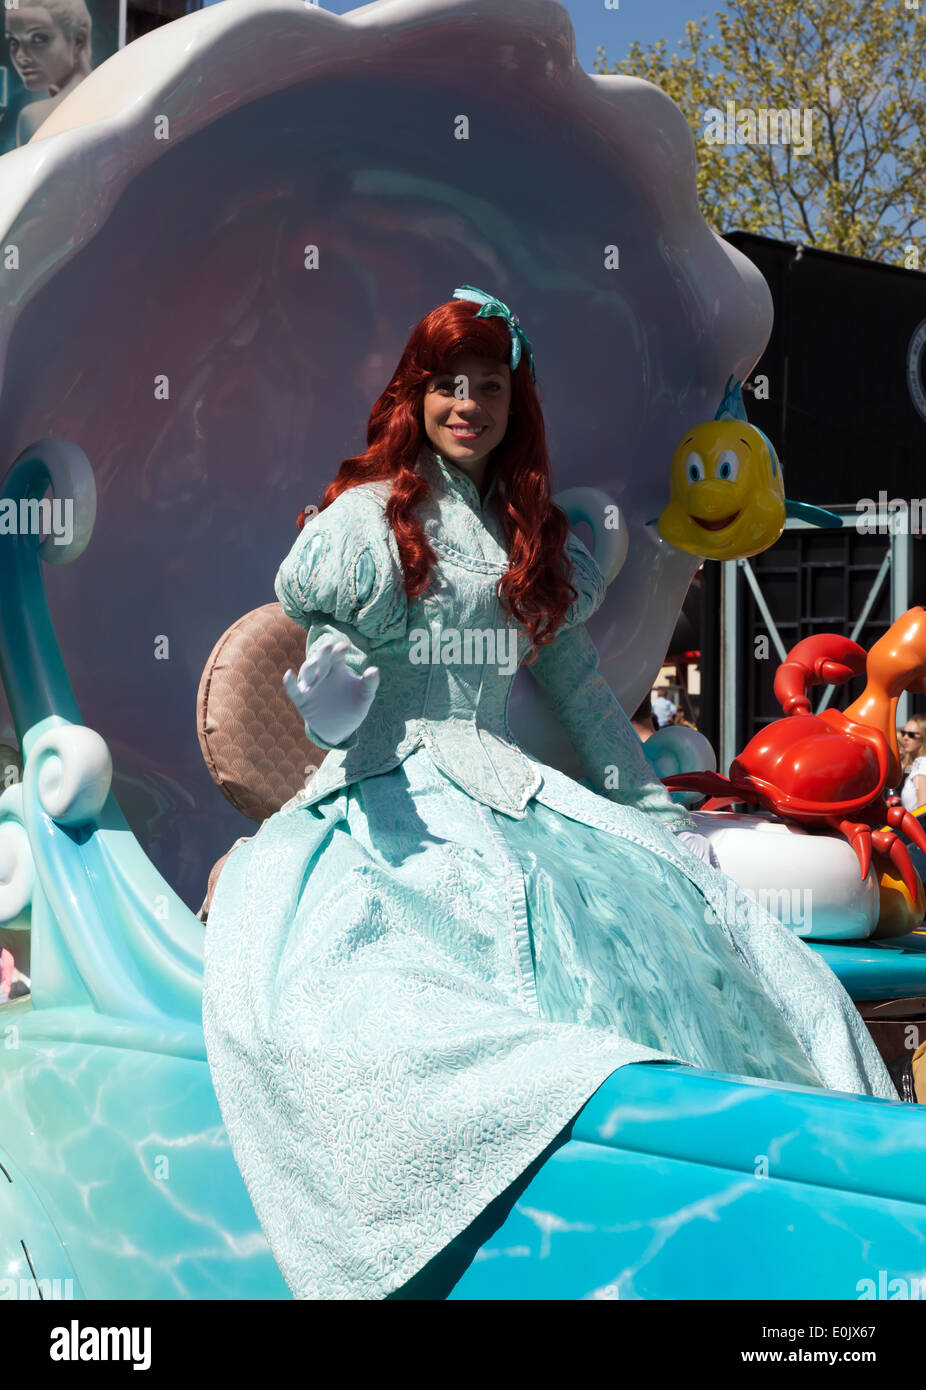 A close-up image of Ariel, from the Little Mermaid film, taking part  in the Stars 'n' Cars, Parade, Walt Disney Studios, Paris. Stock Photo